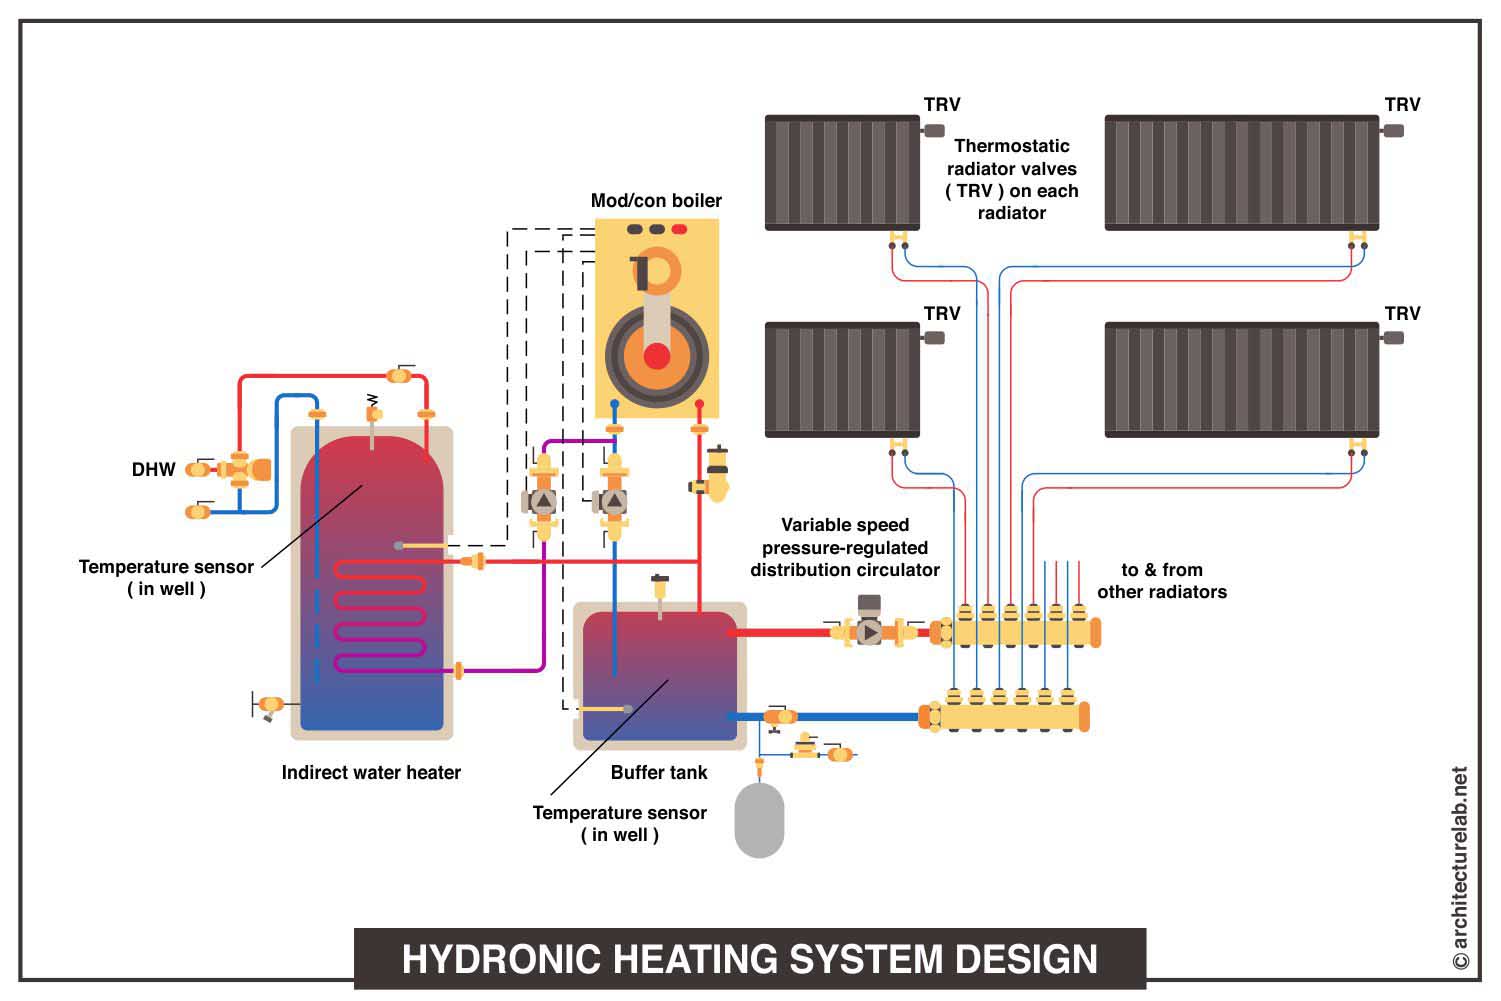 Hydronic heating system design 1